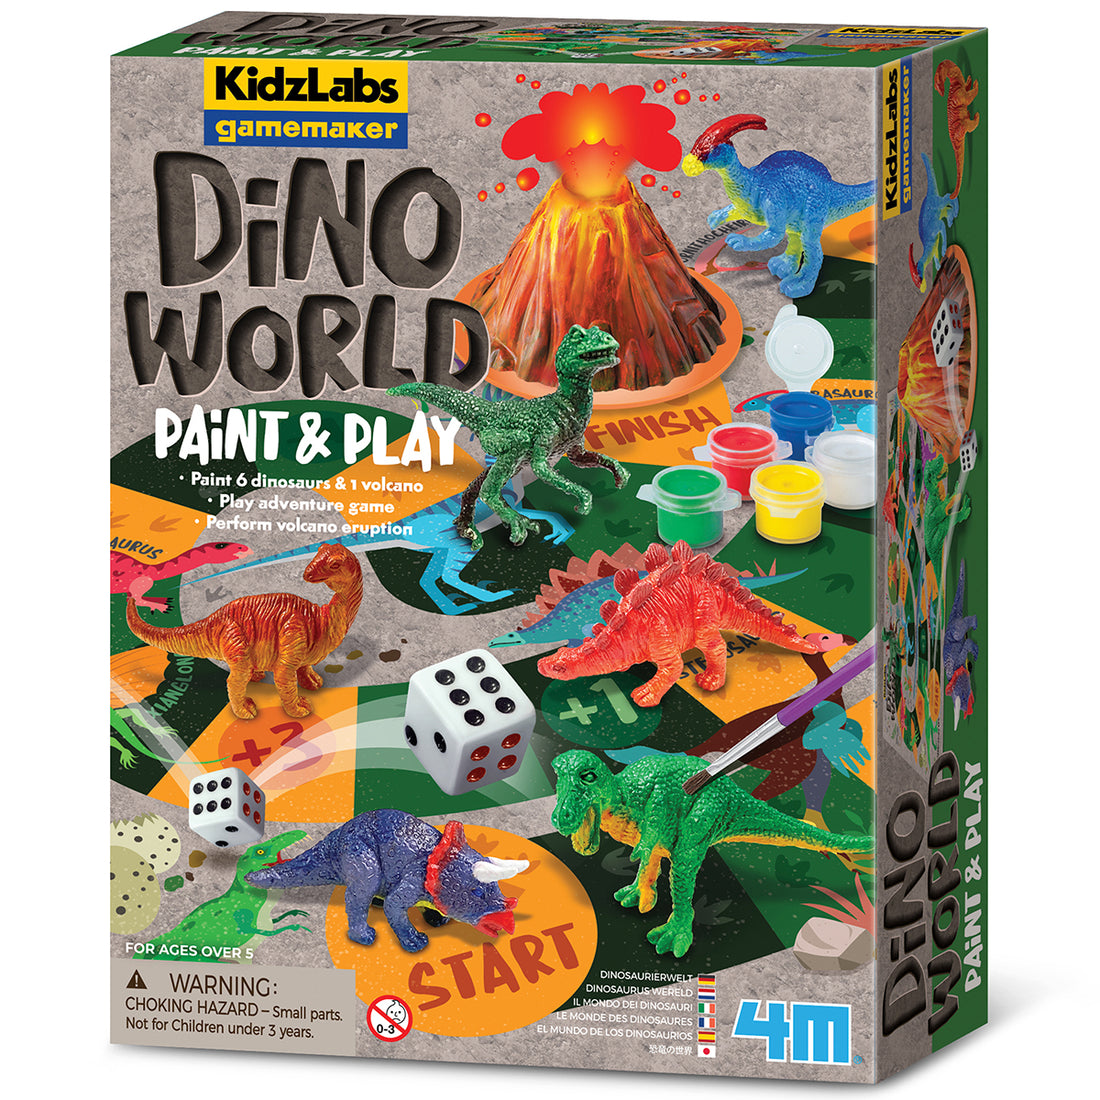 The game of Dinosaurs